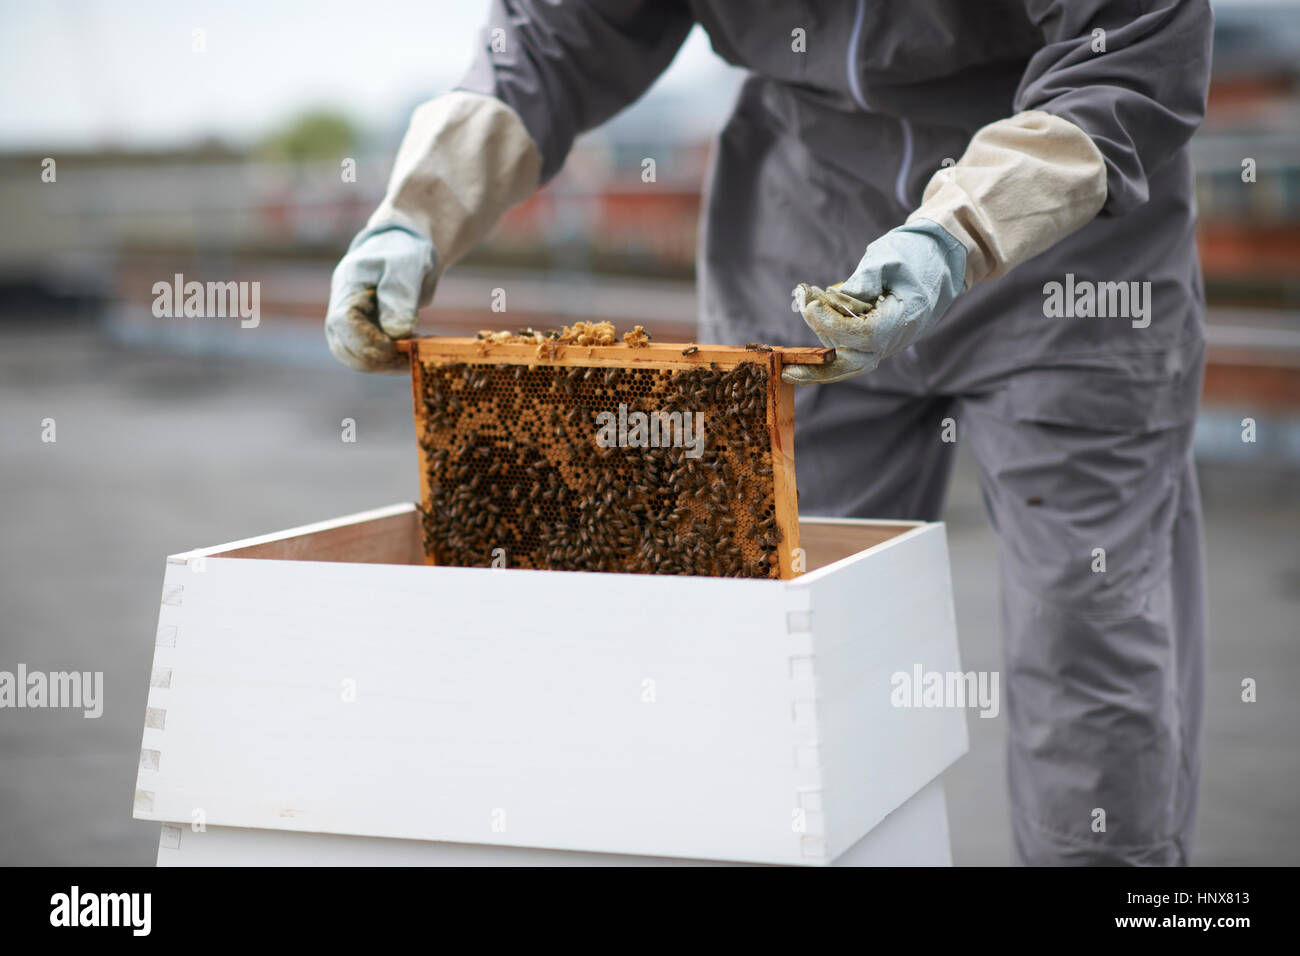 Beekeeper removing hive frame from hive, mid section Stock Photo